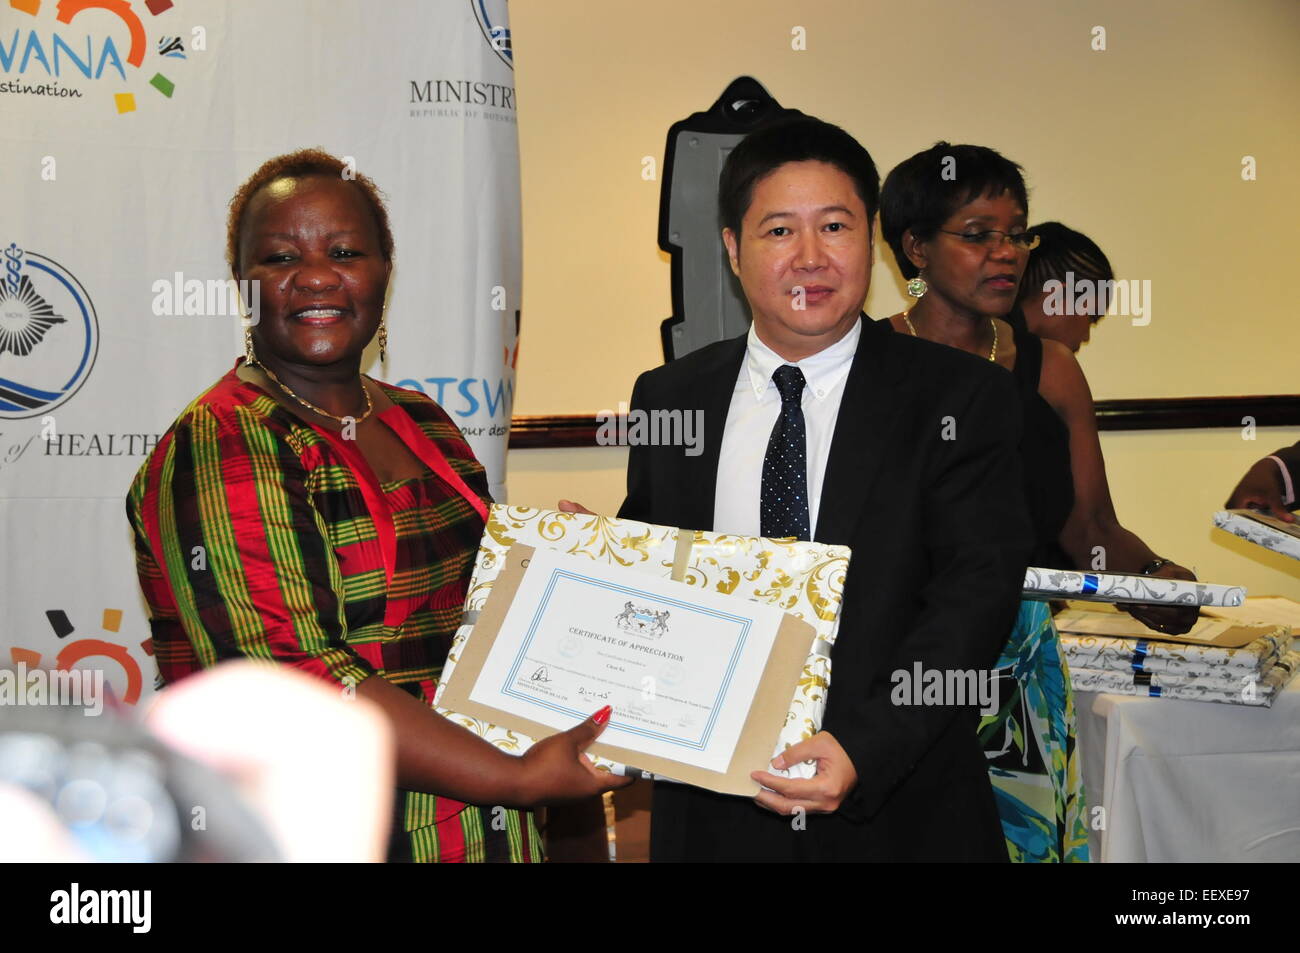 Gaborone, Botswana. 22nd Jan, 2015. Botswana's Health Minister Dorcas Makgato (L) presents a certificate of appreciation to a member of the 13th Chinese medical team during a farewell ceremony in Gaborone, capital of Botswana, Jan. 22, 2015. © Lyu Tianran/Xinhua/Alamy Live News Stock Photo